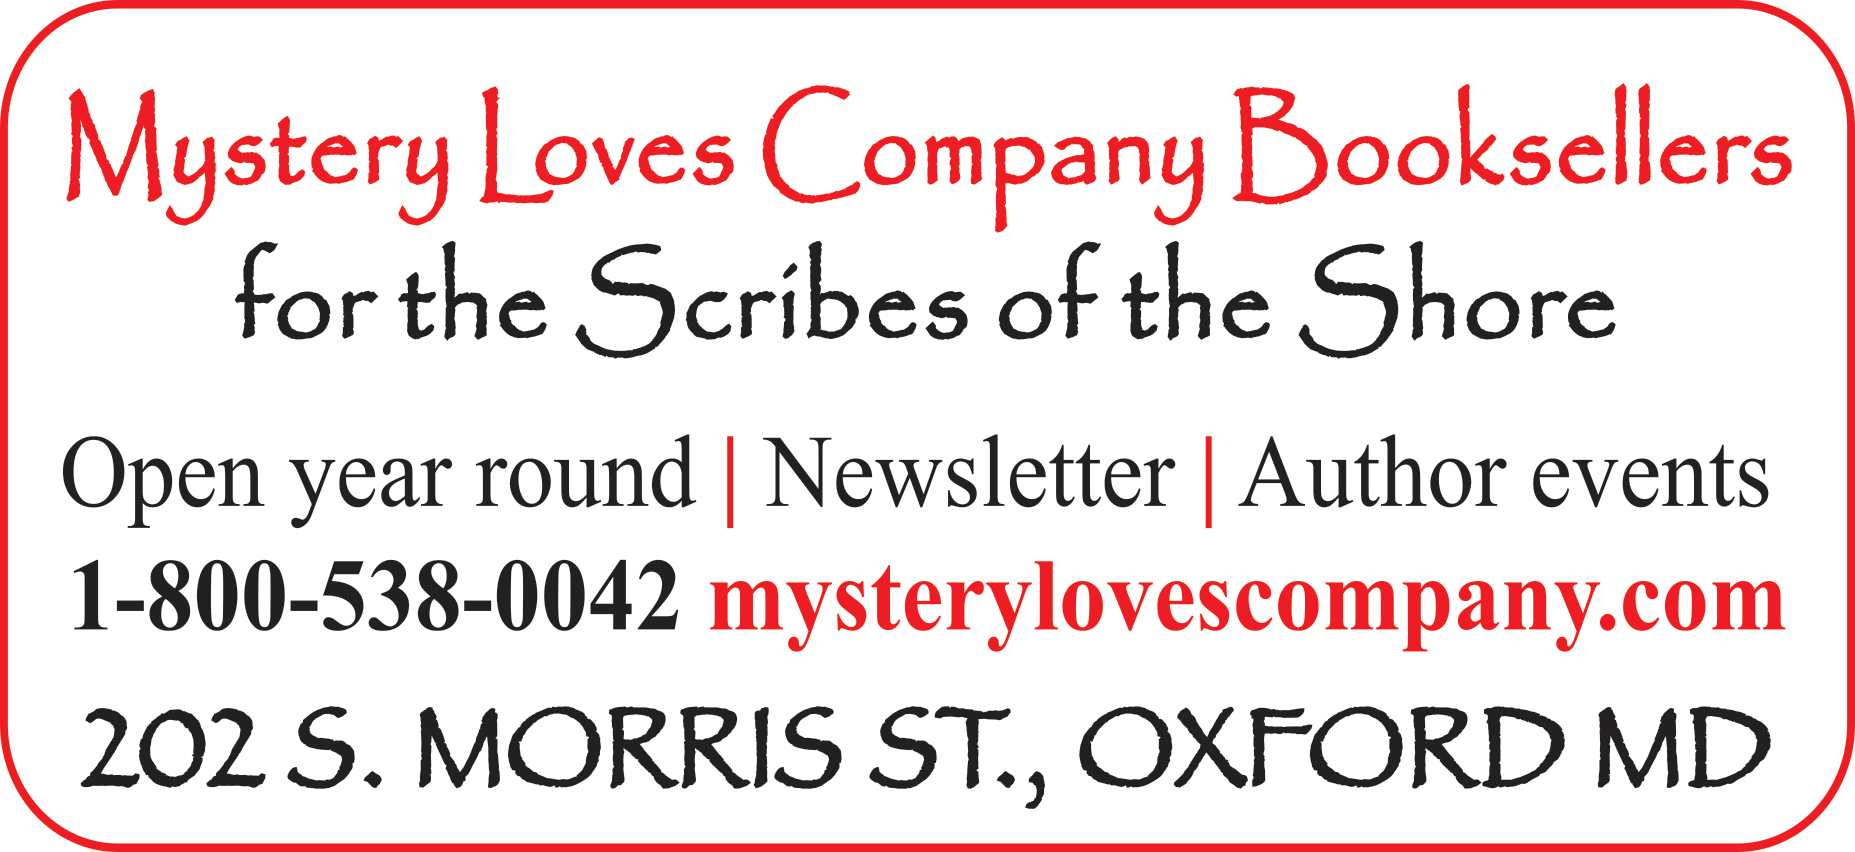 Mystery Loves Company Booksellers Print Ad